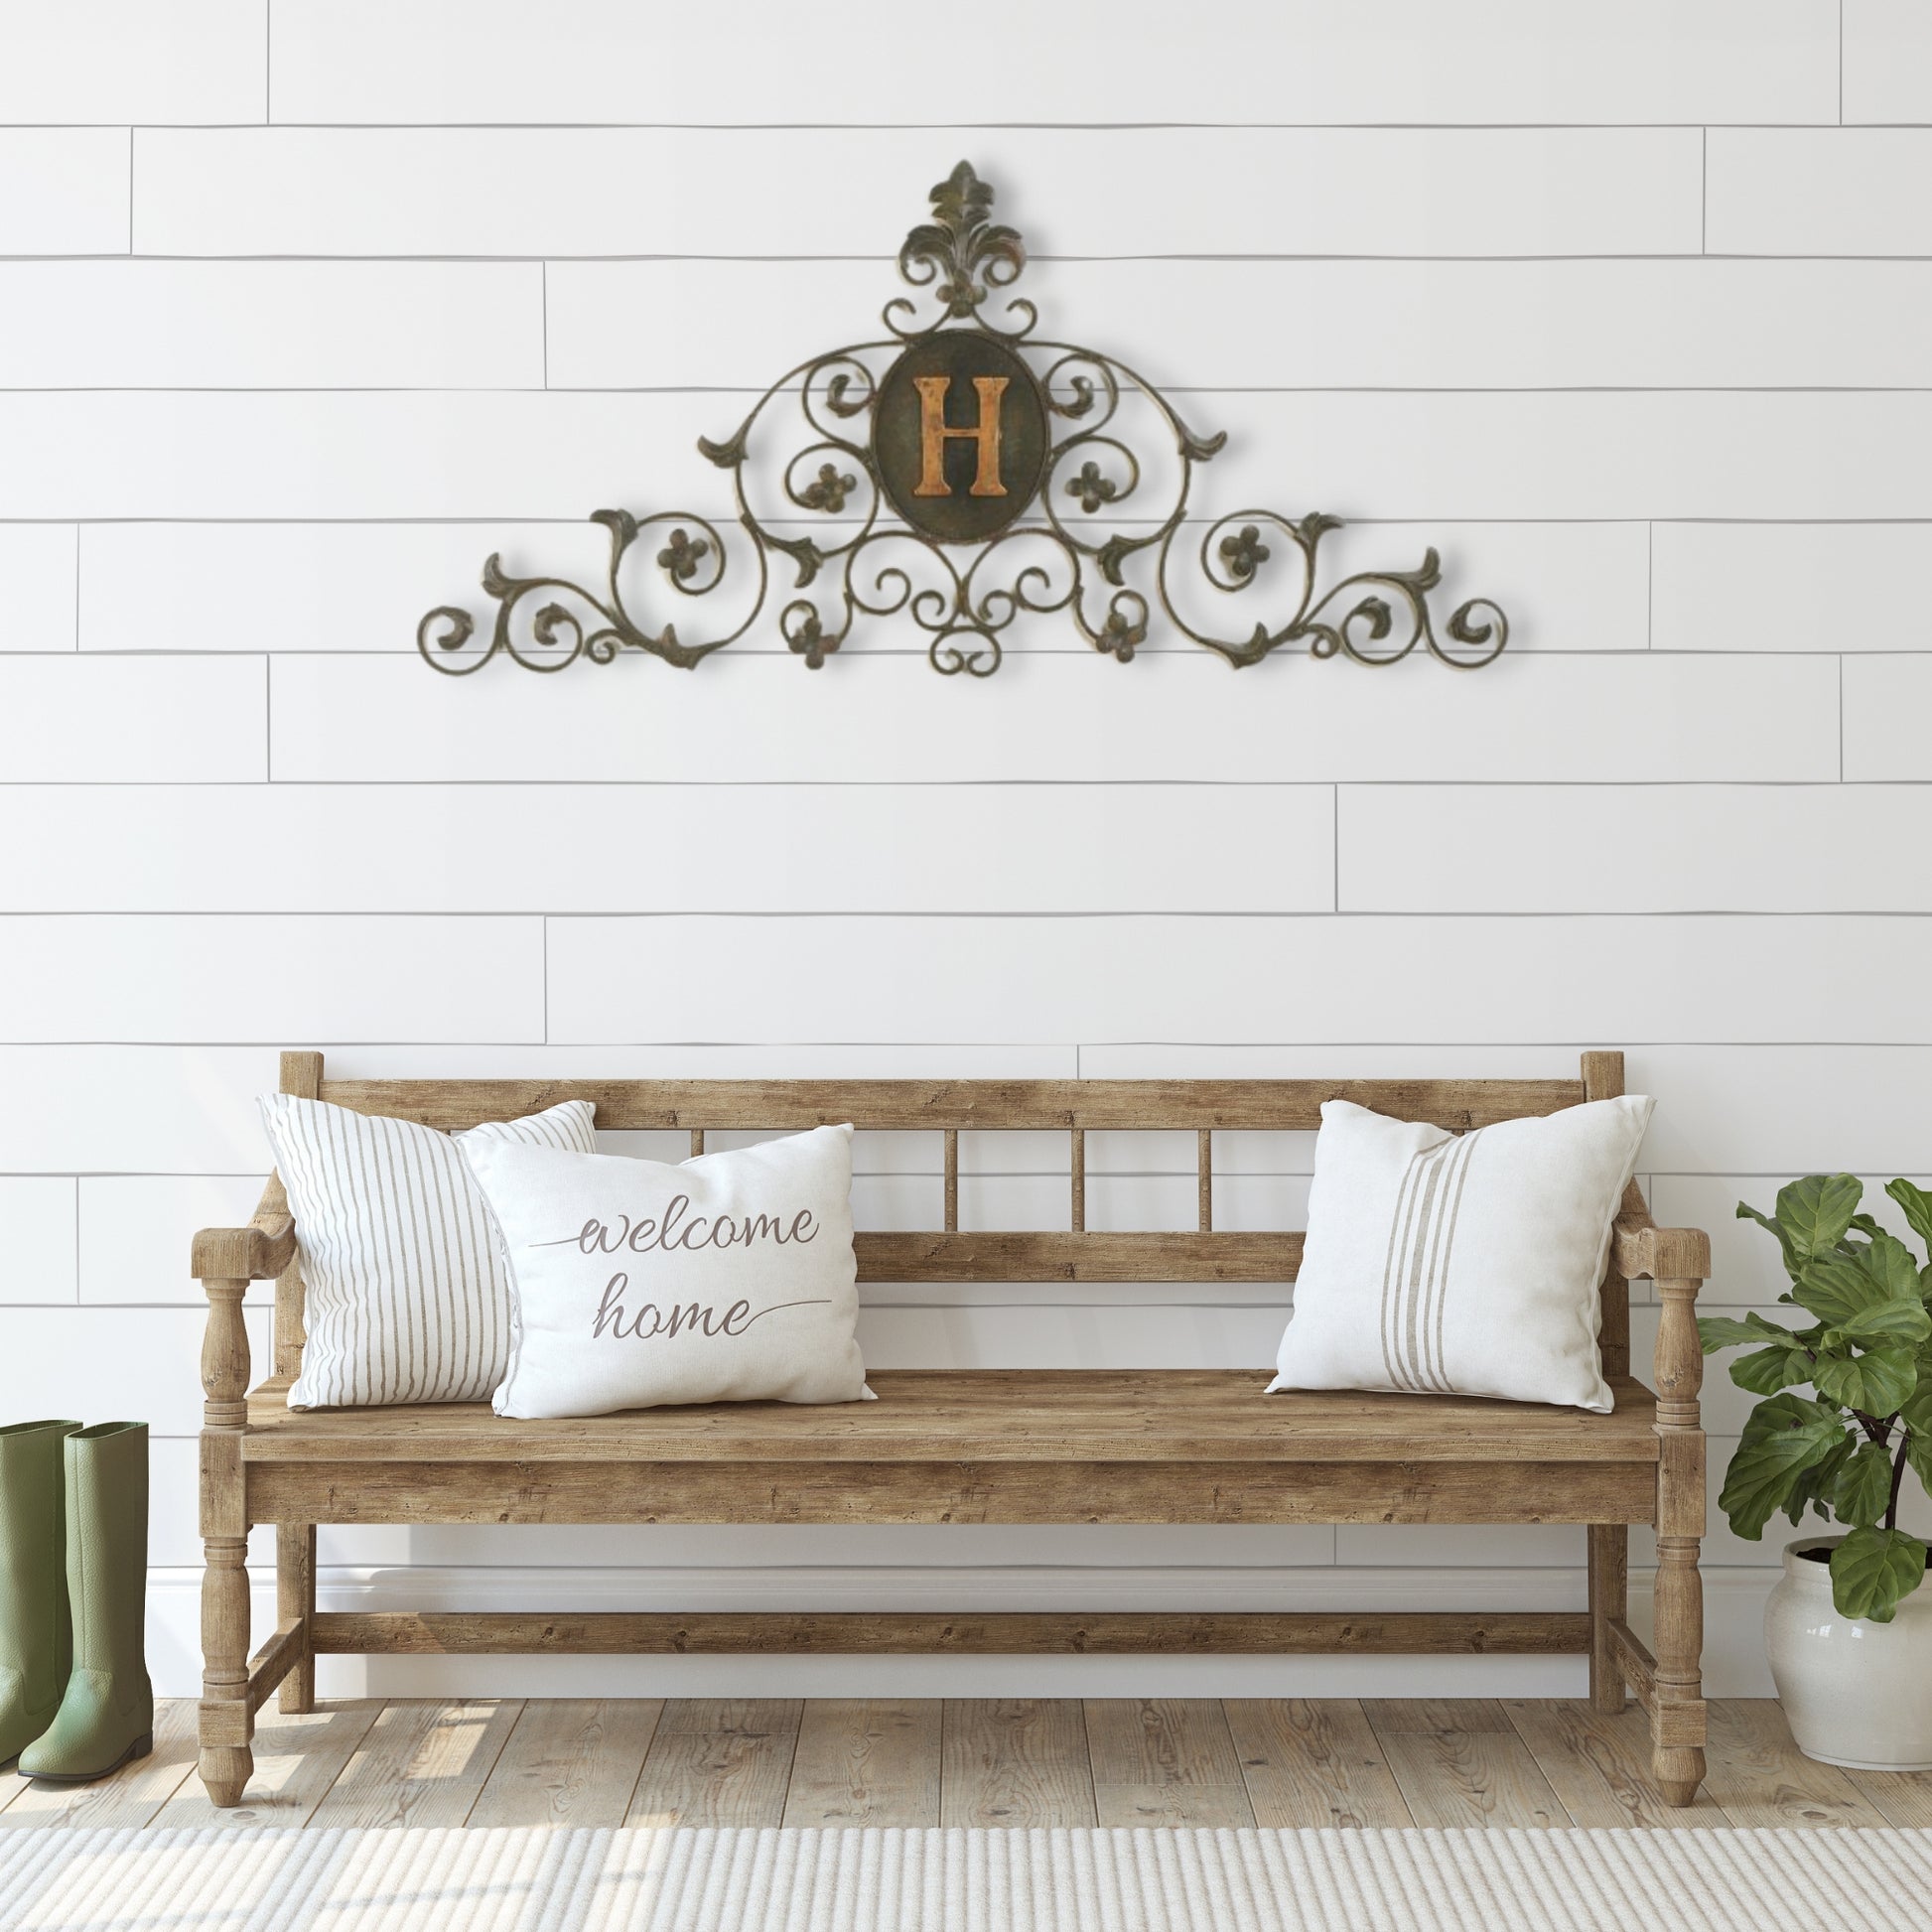 Leaf and Fleur de Lis Iron Monogrammed Wall Grille - Monogram Wall Decor | Estate Quality Home Decor | Personalized Wall Decor | Shown with the Monogram "H" | Iron finished in a faux green brown stain with Italian gold 5" monogram shown over rustic wood bench on front porch | INSIDE OUT | InsideOutCatalog.com